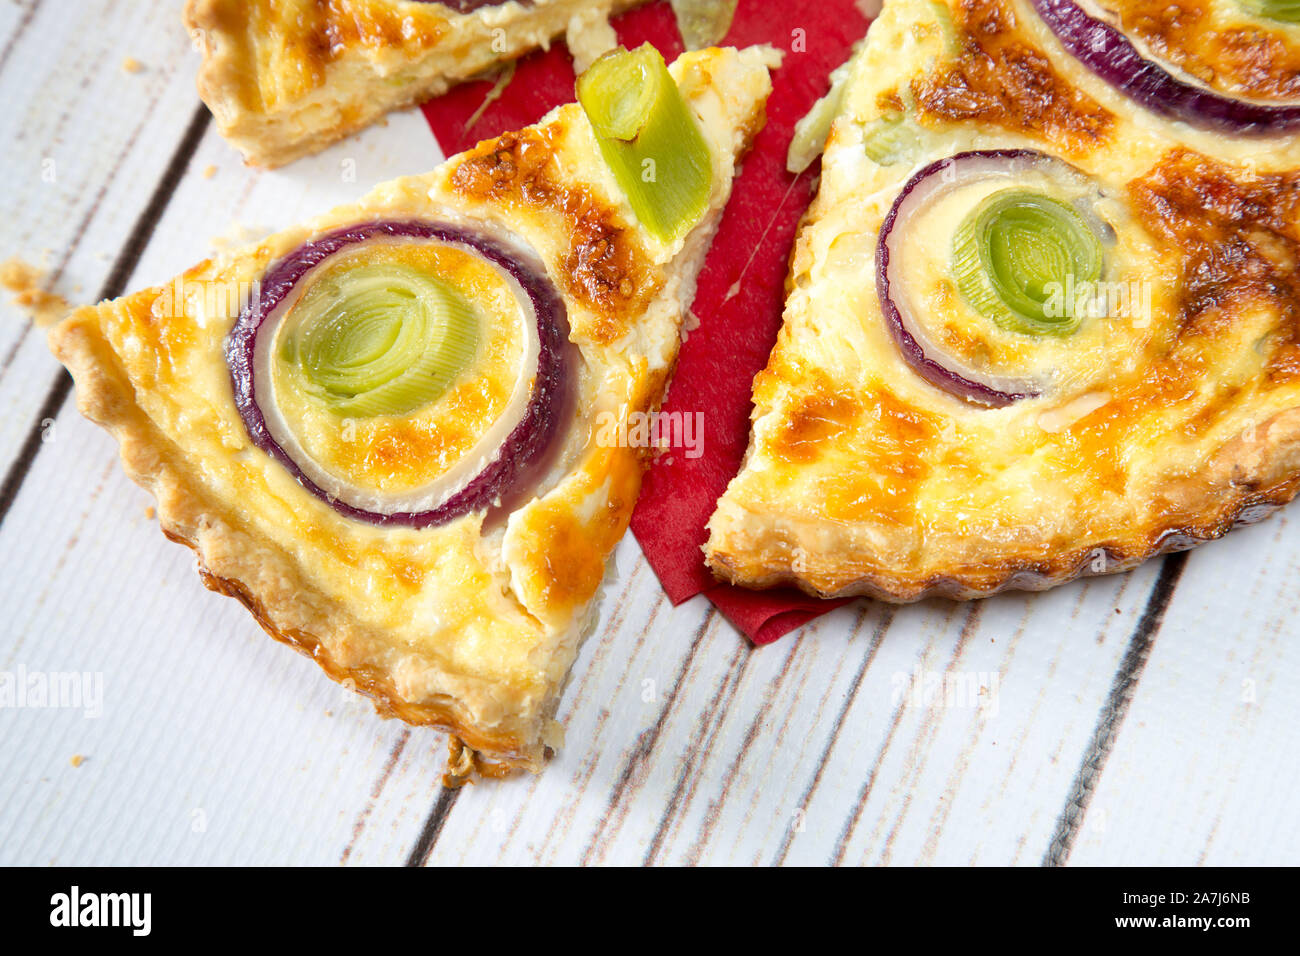 Vegetarian cheese and leek quiche. Stock Photo